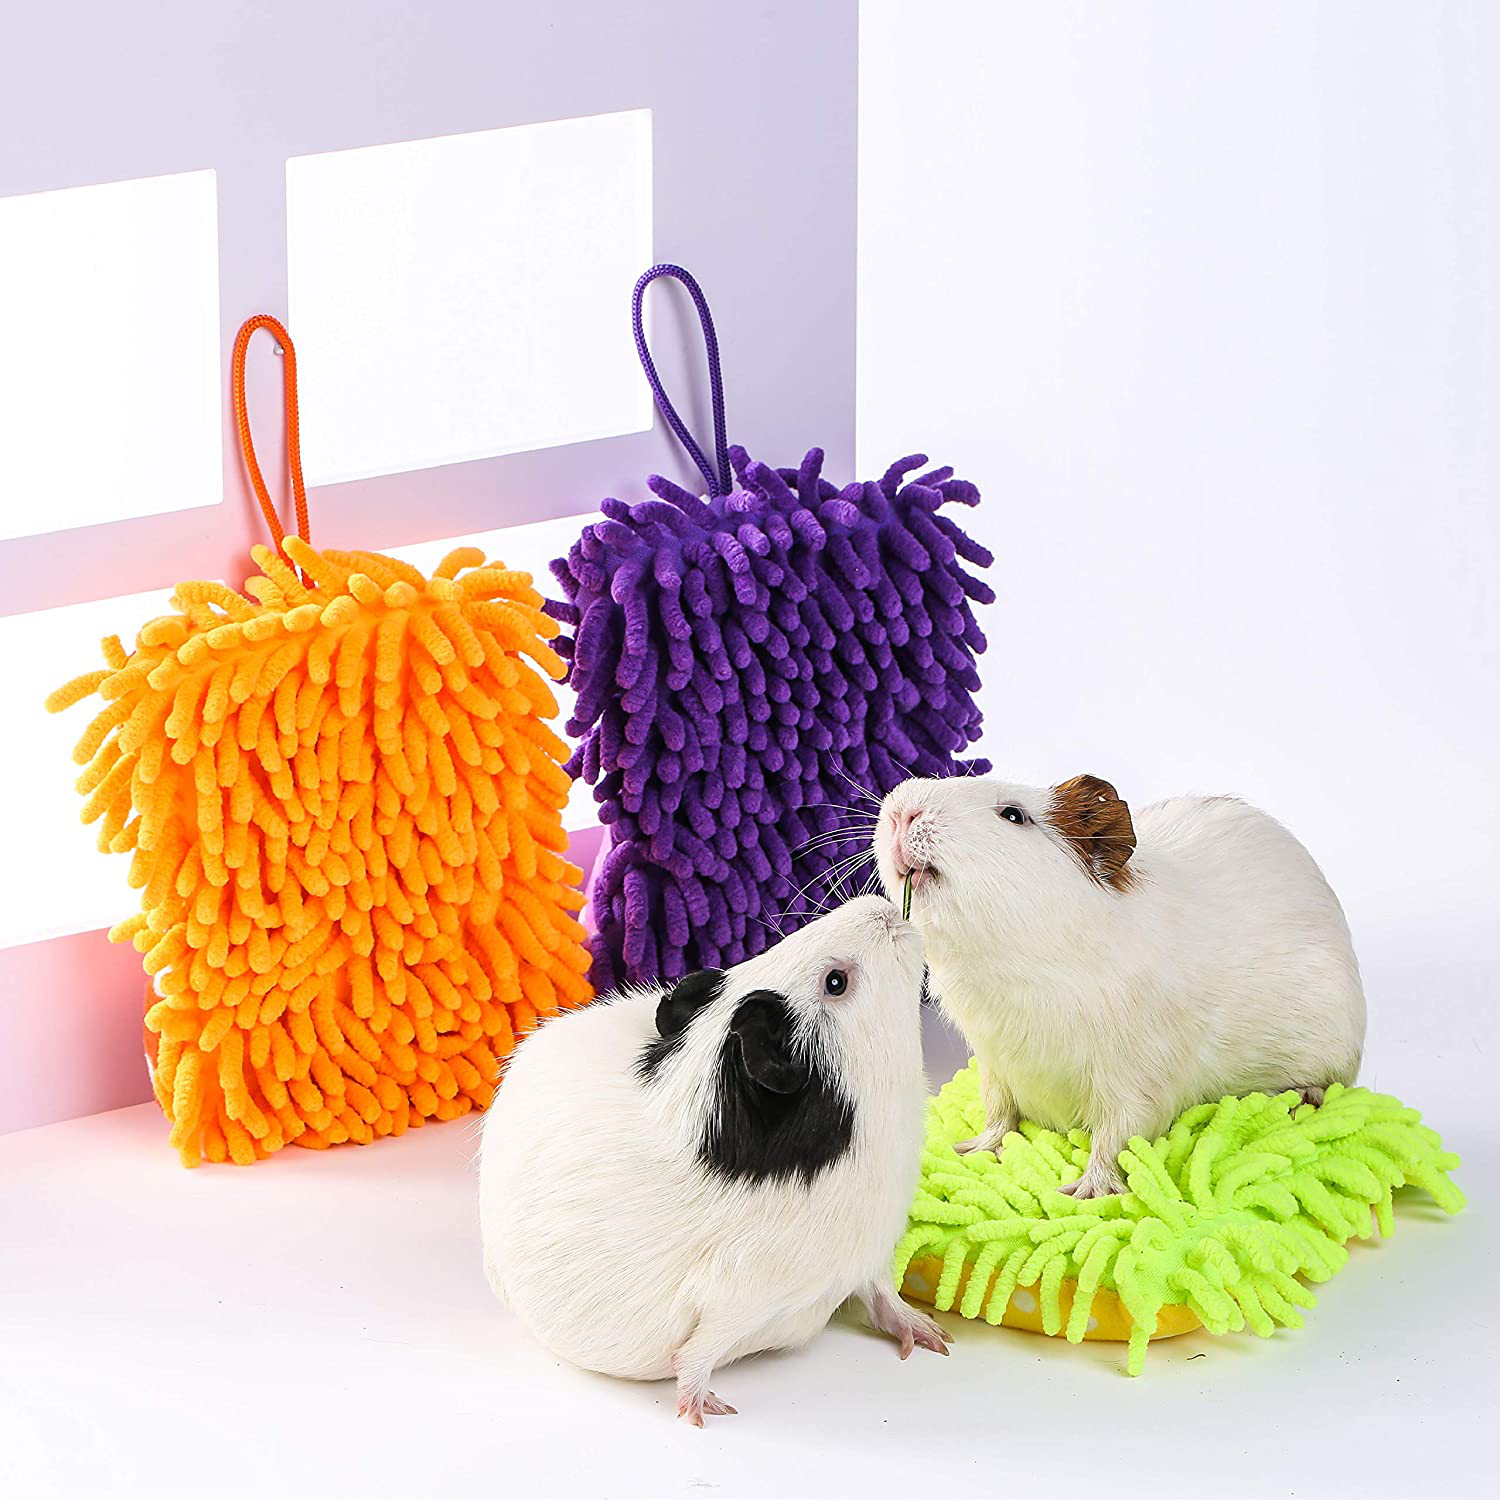 Janyoo Guinea Pig Bed Accessories for Cage Pads Set Soft Cushions Supplies Pack Cute Pillow Mat for Small Animal Girls Boys